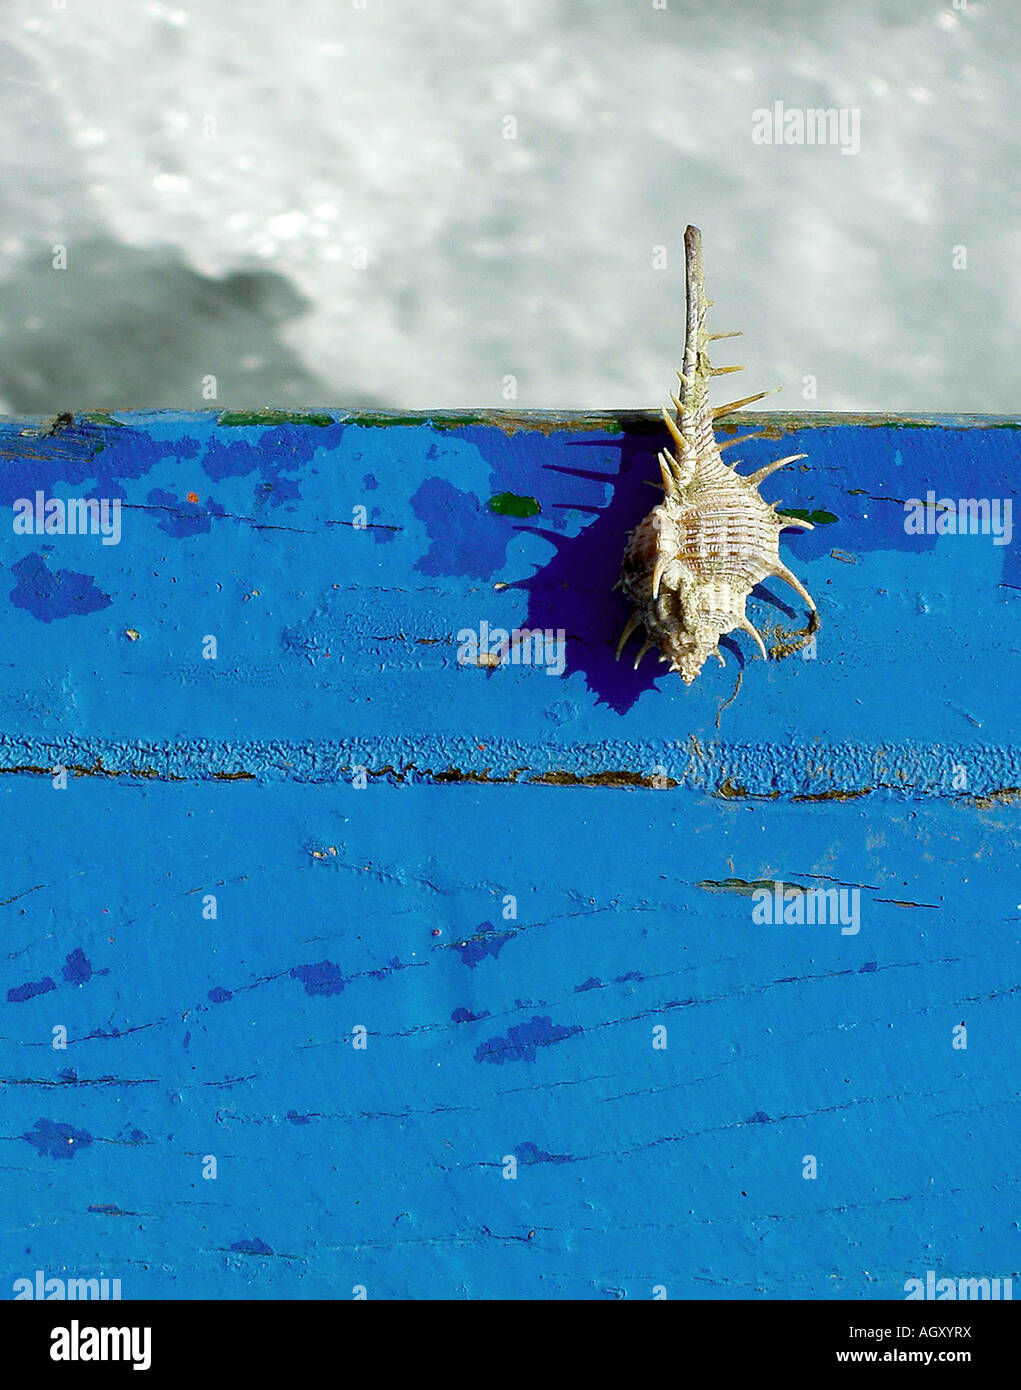 Painet jn7246 shell board boat water shadow spine blue paint texture peel thailand line sharp sea animal background Stock Photo